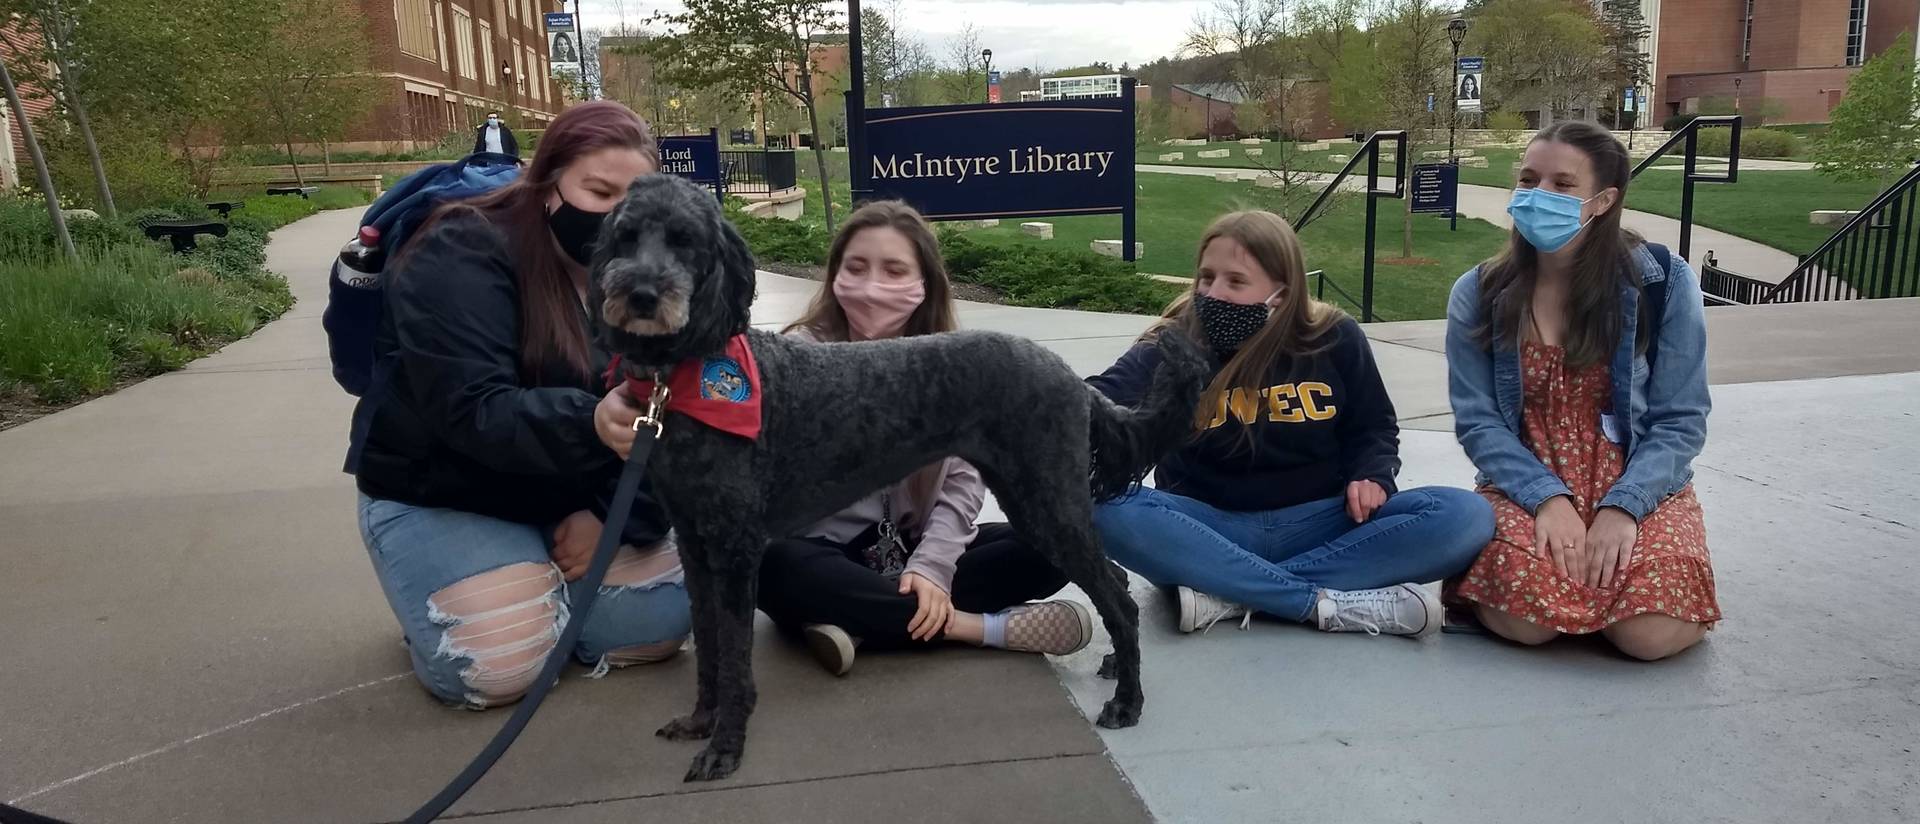 Therpay dog and students outside library